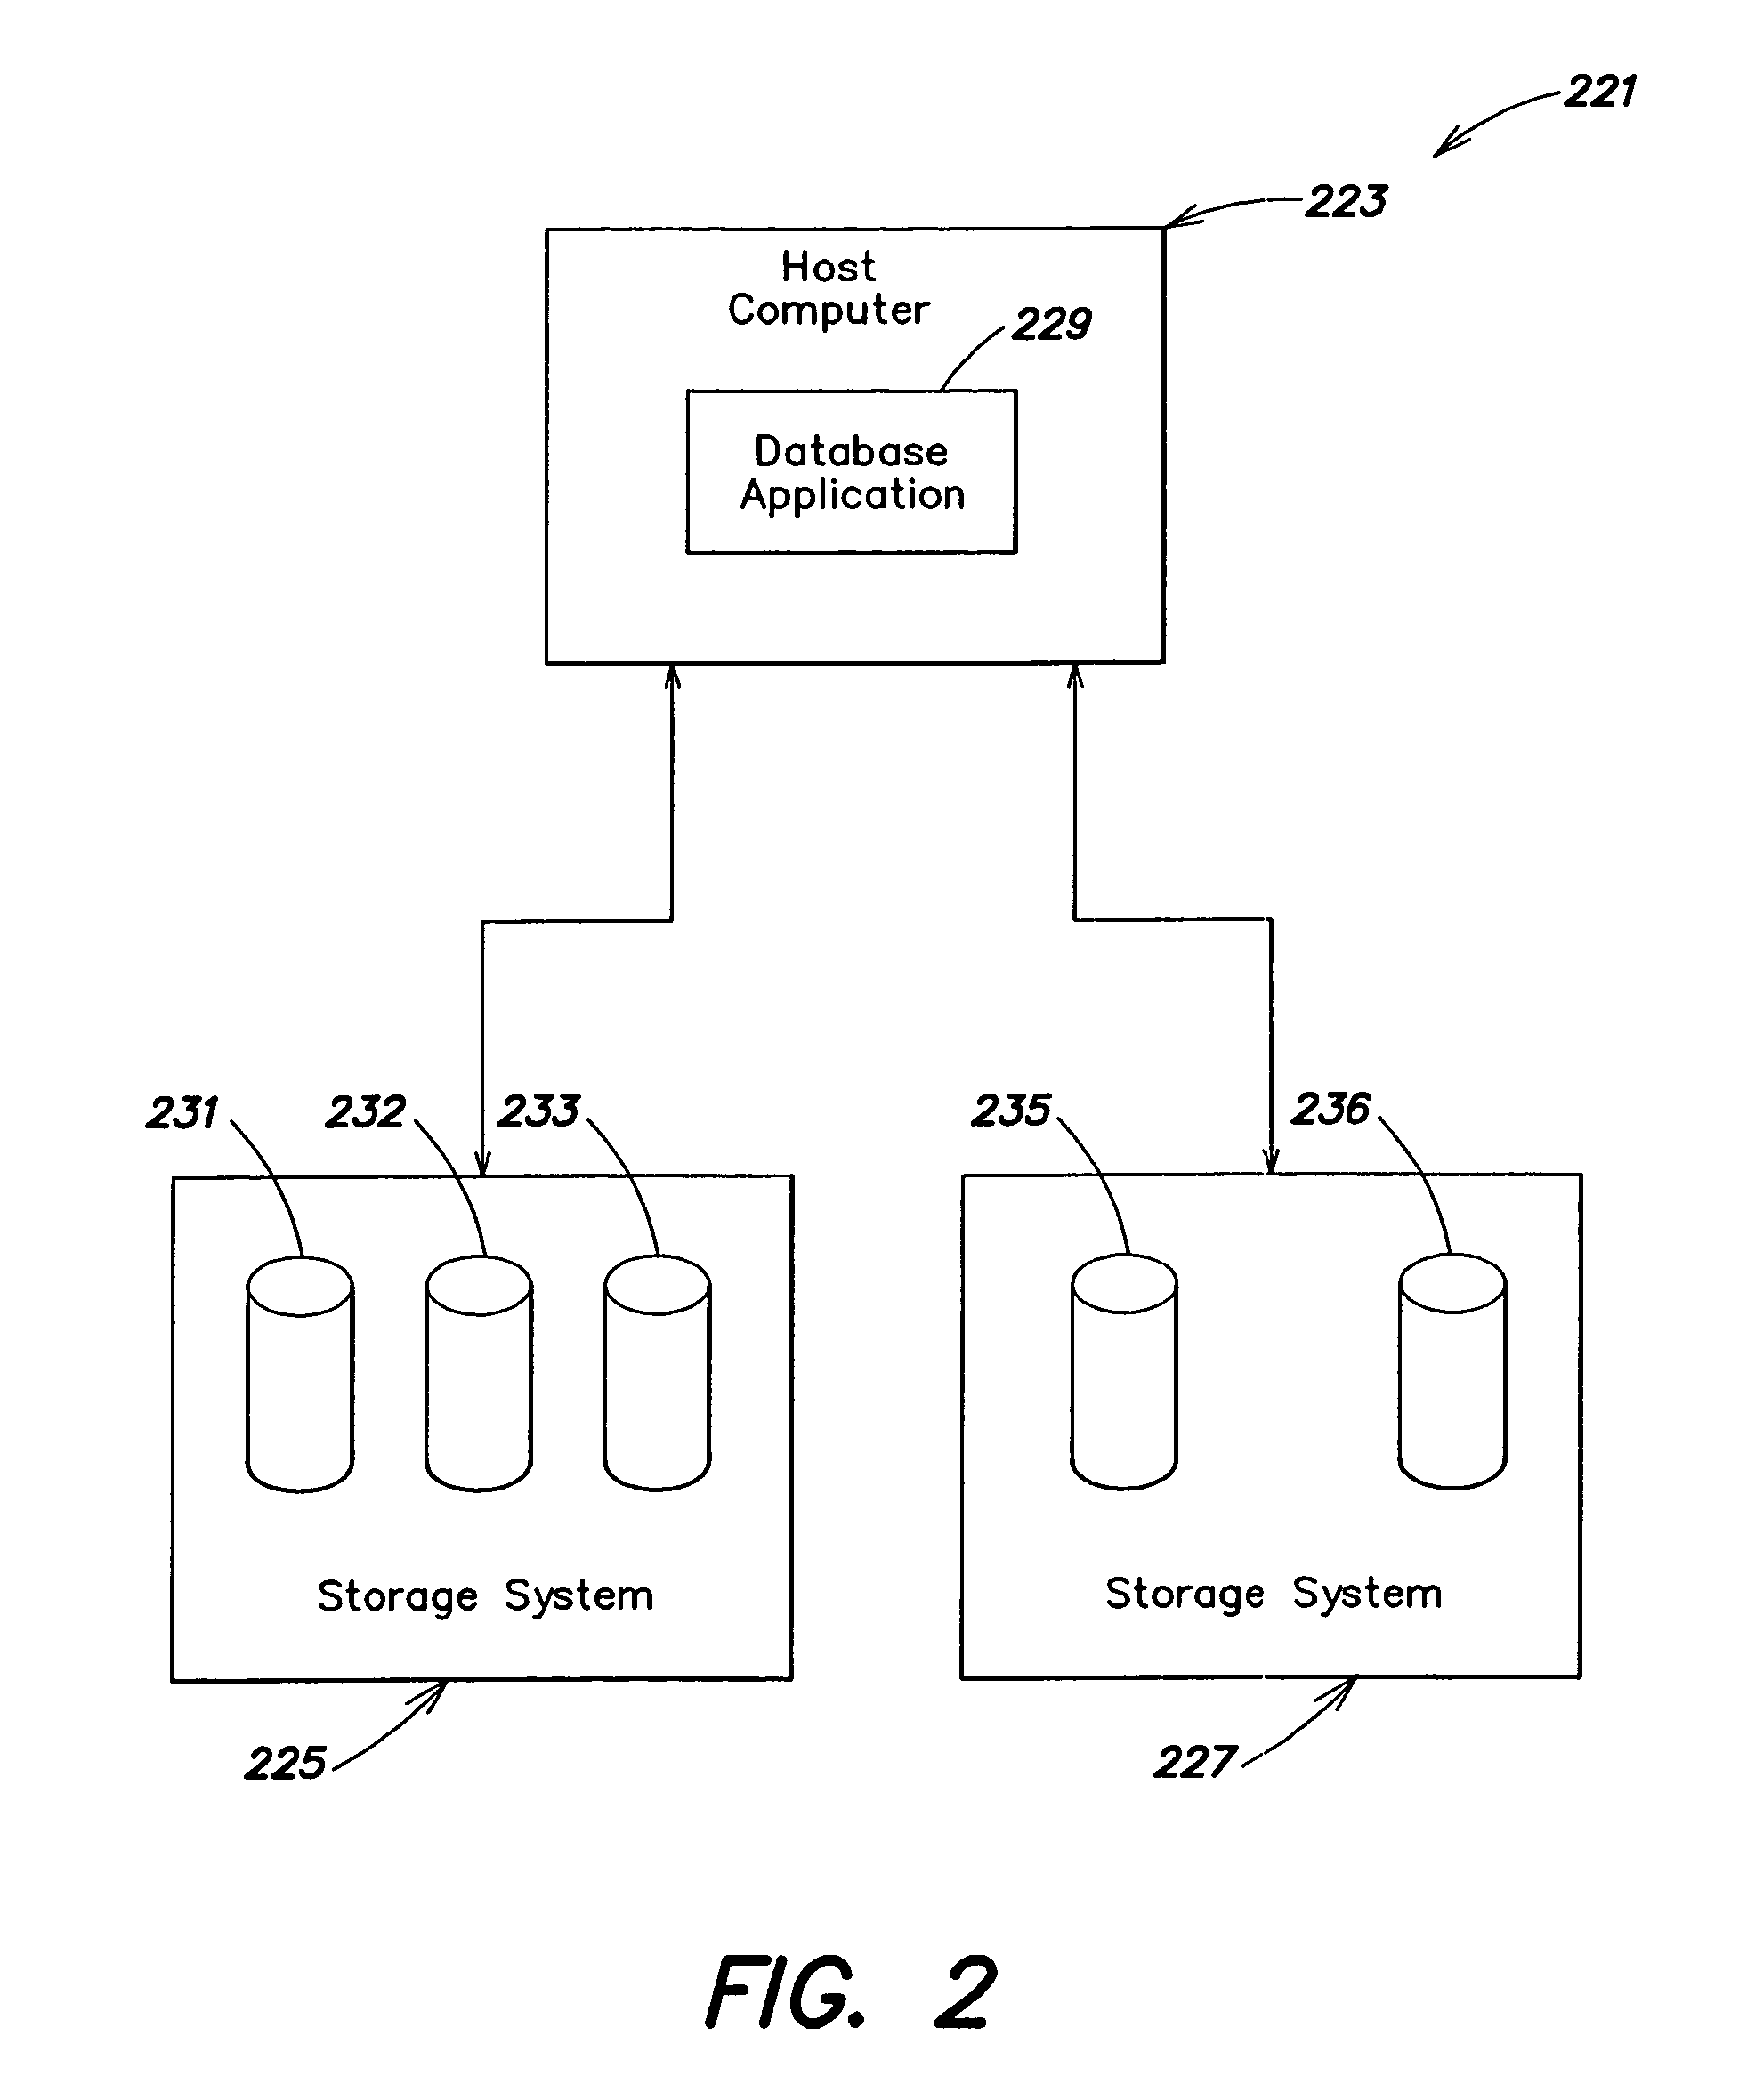 Method and apparatus for migrating data and automatically provisioning a target for the migration